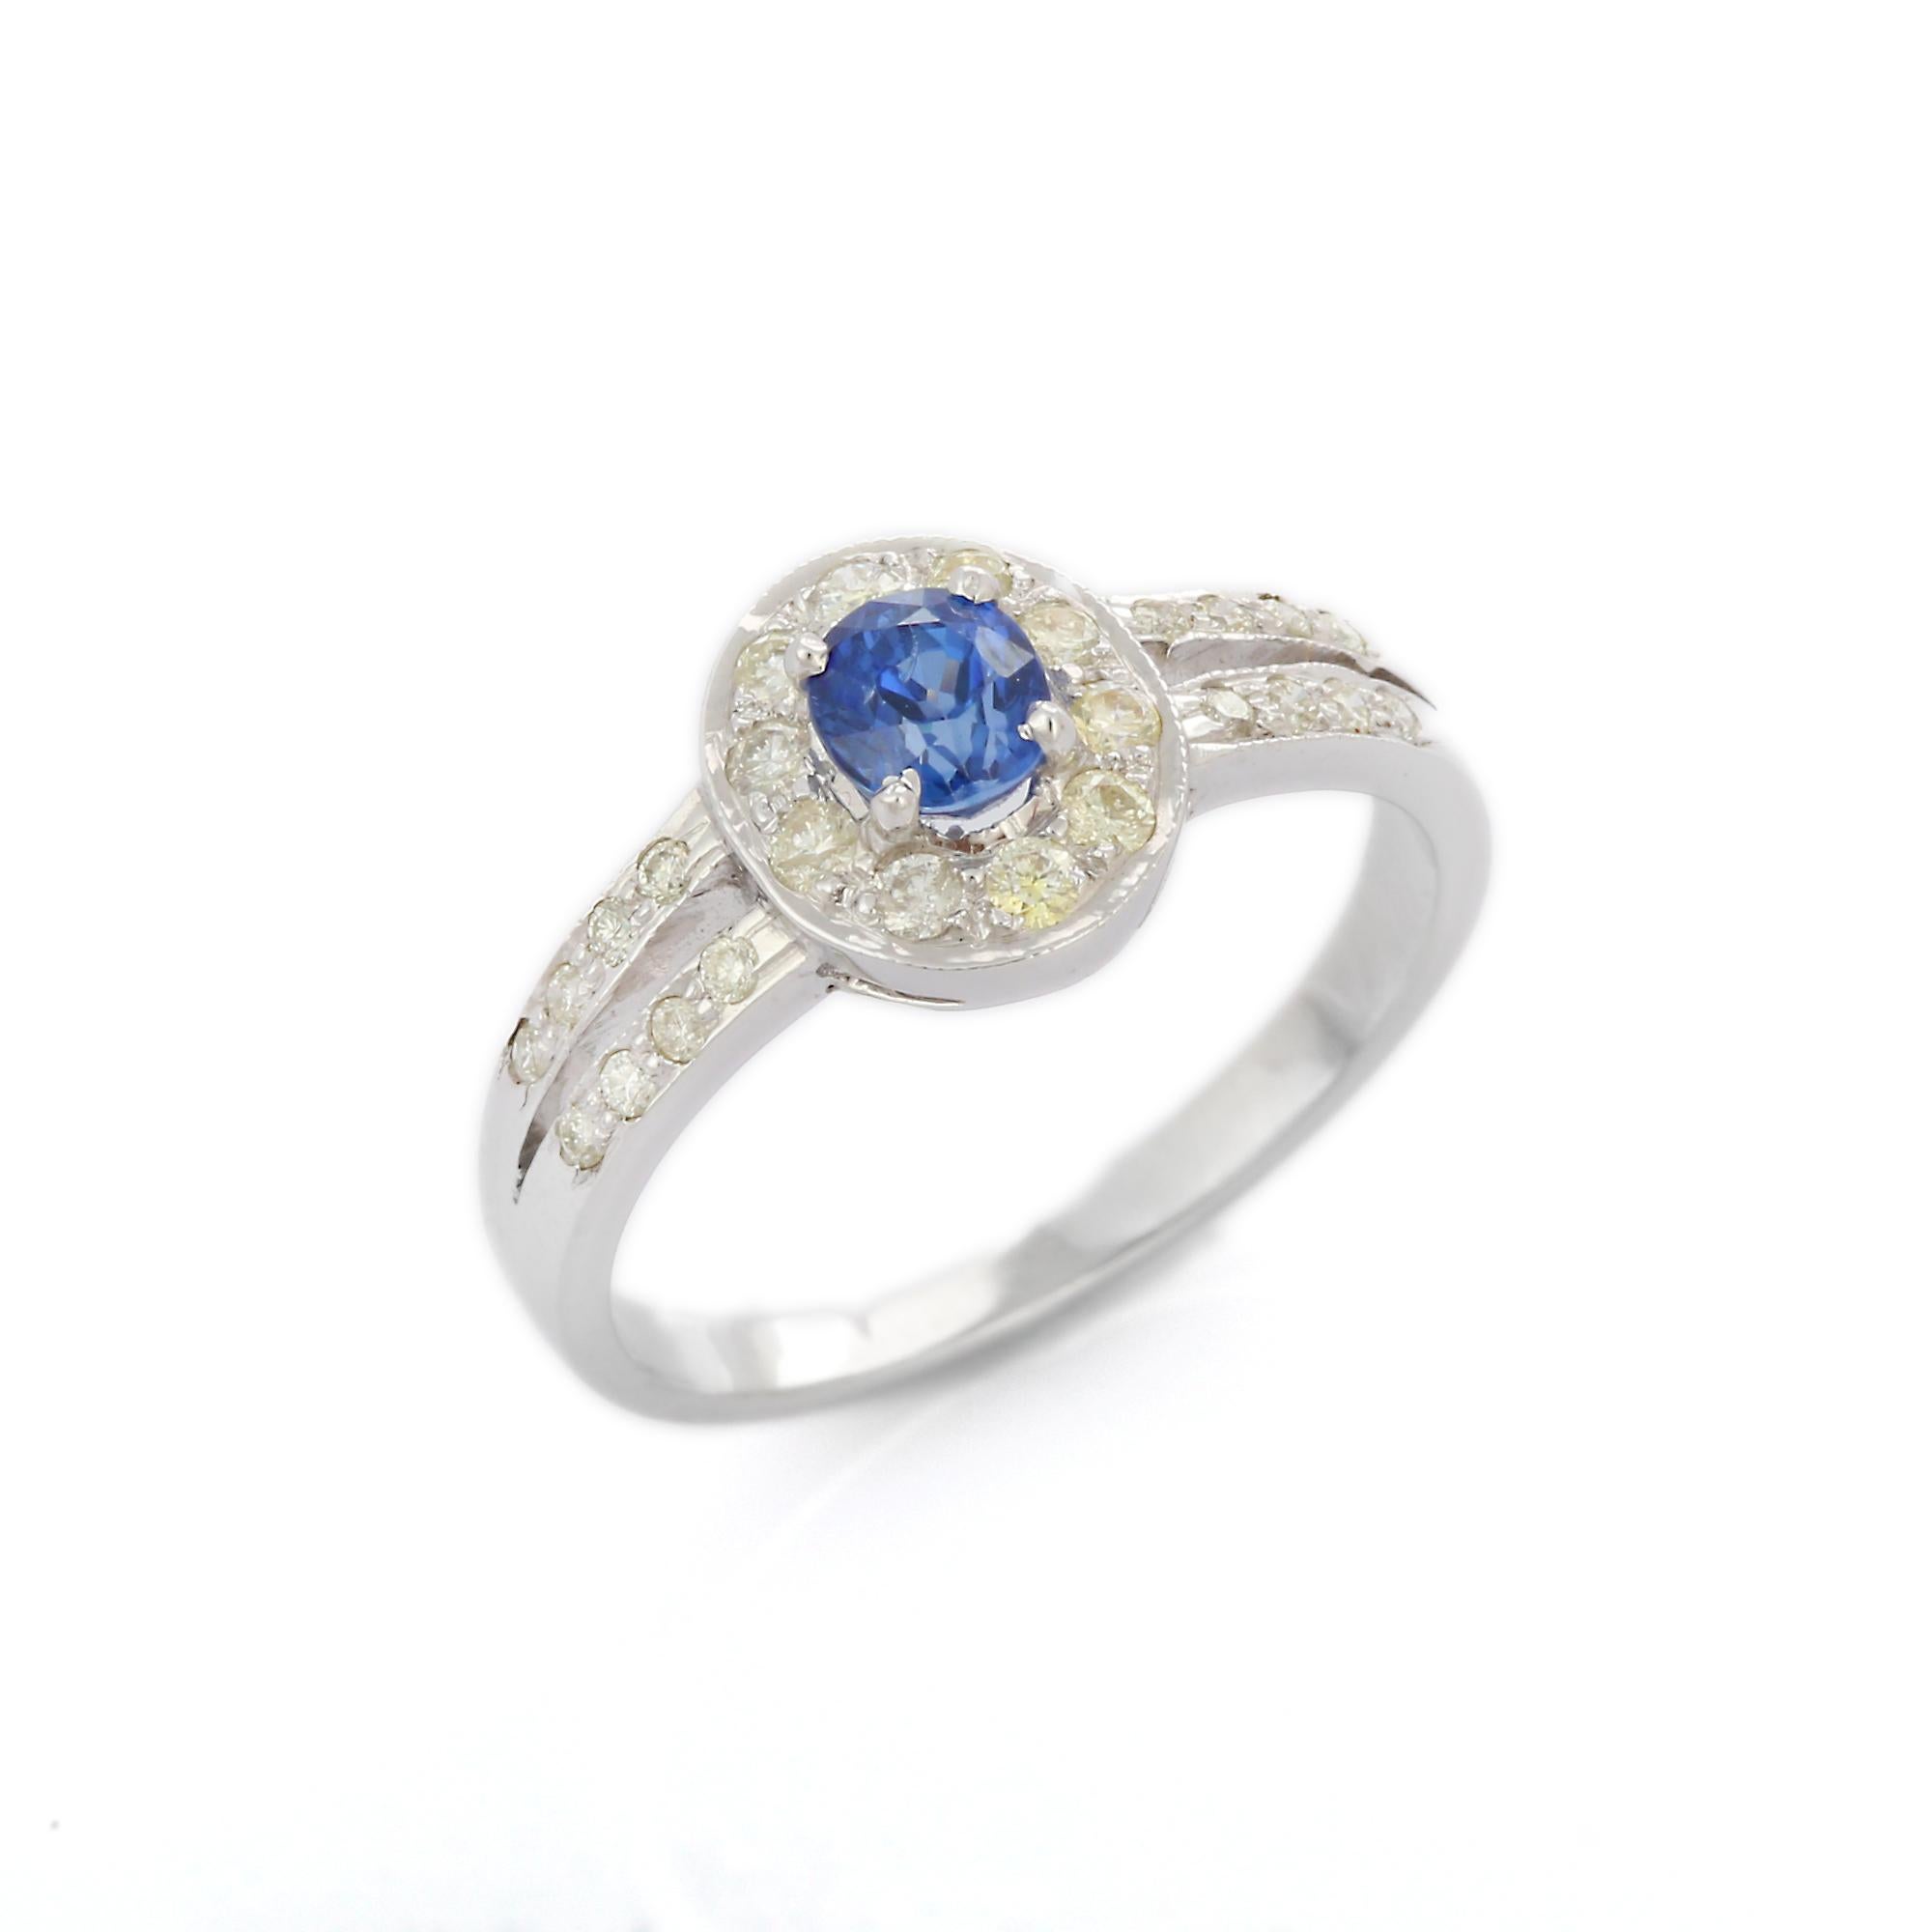 For Sale:  Blue Sapphire and Diamond Engagement Ring Gift For Her in 18K White Gold 5